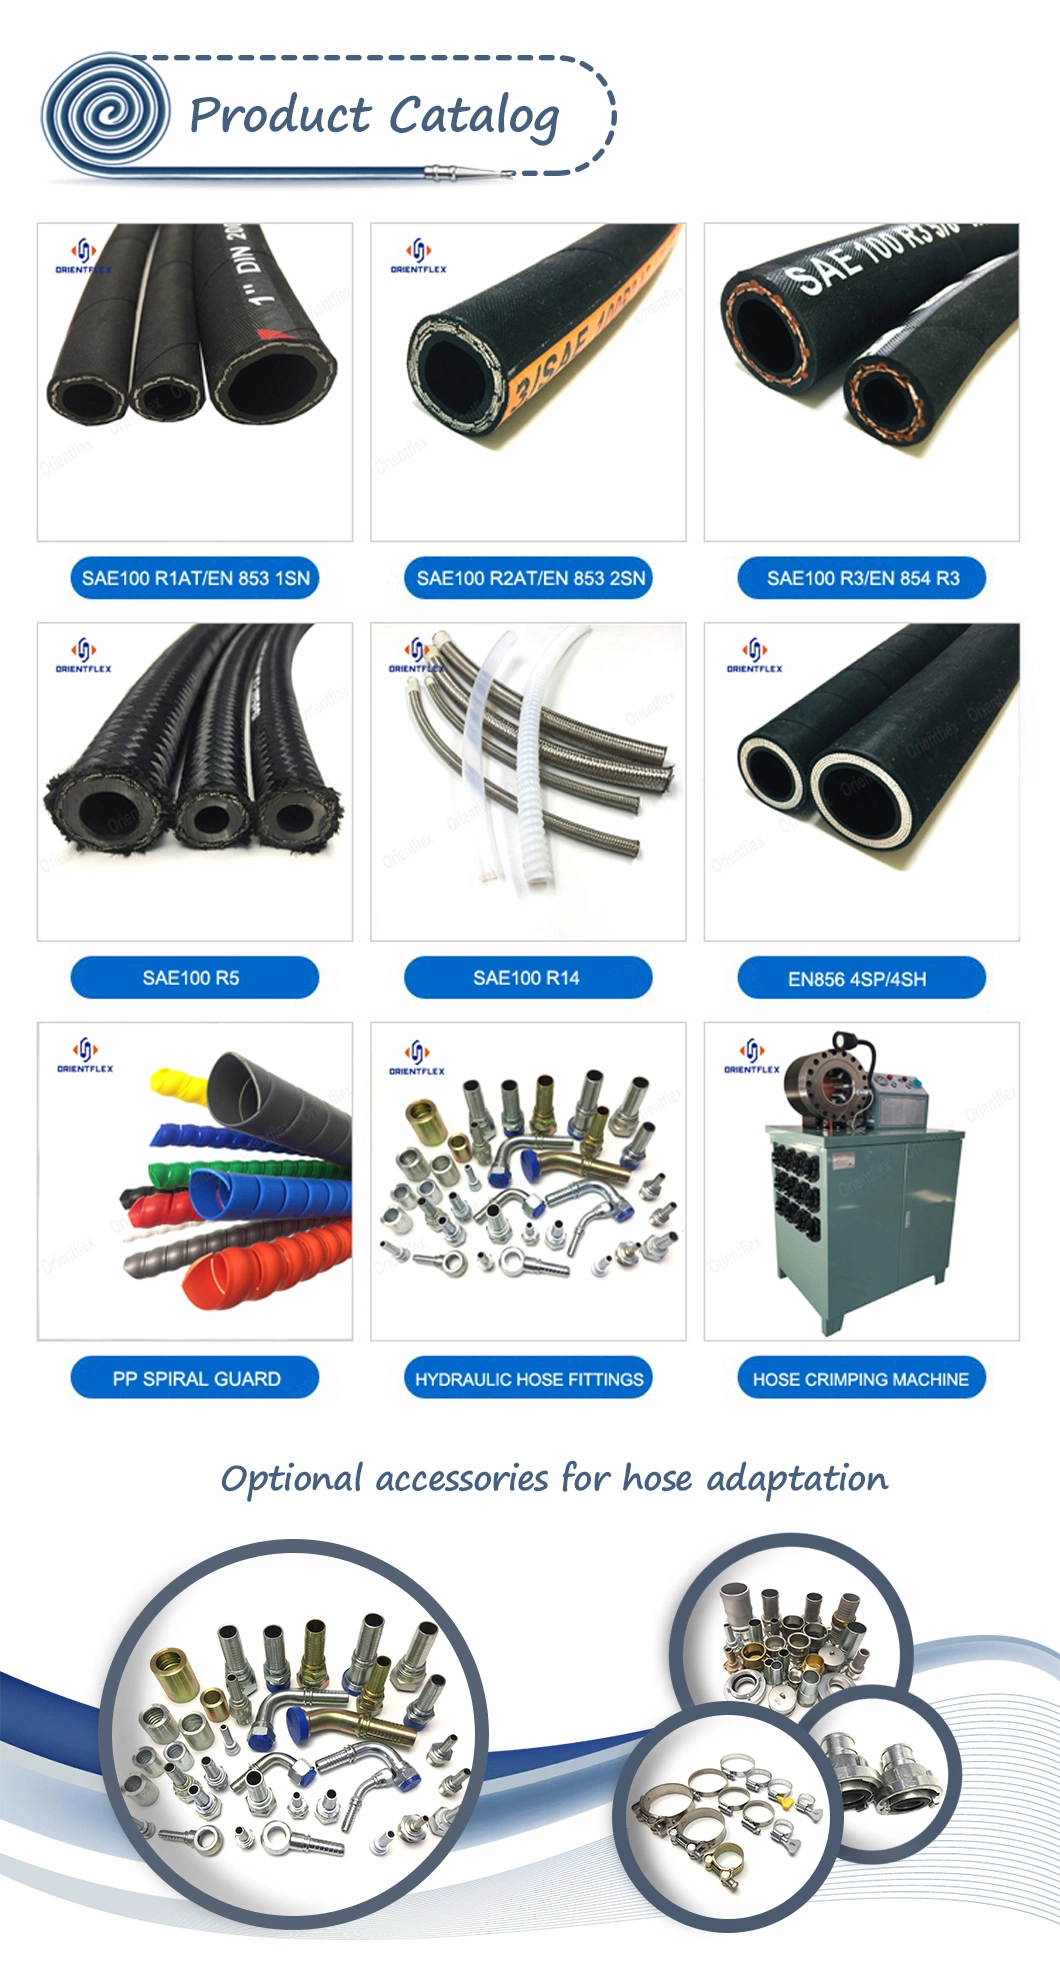 Braided Hydraulic Suction Hose Lines and Fittings